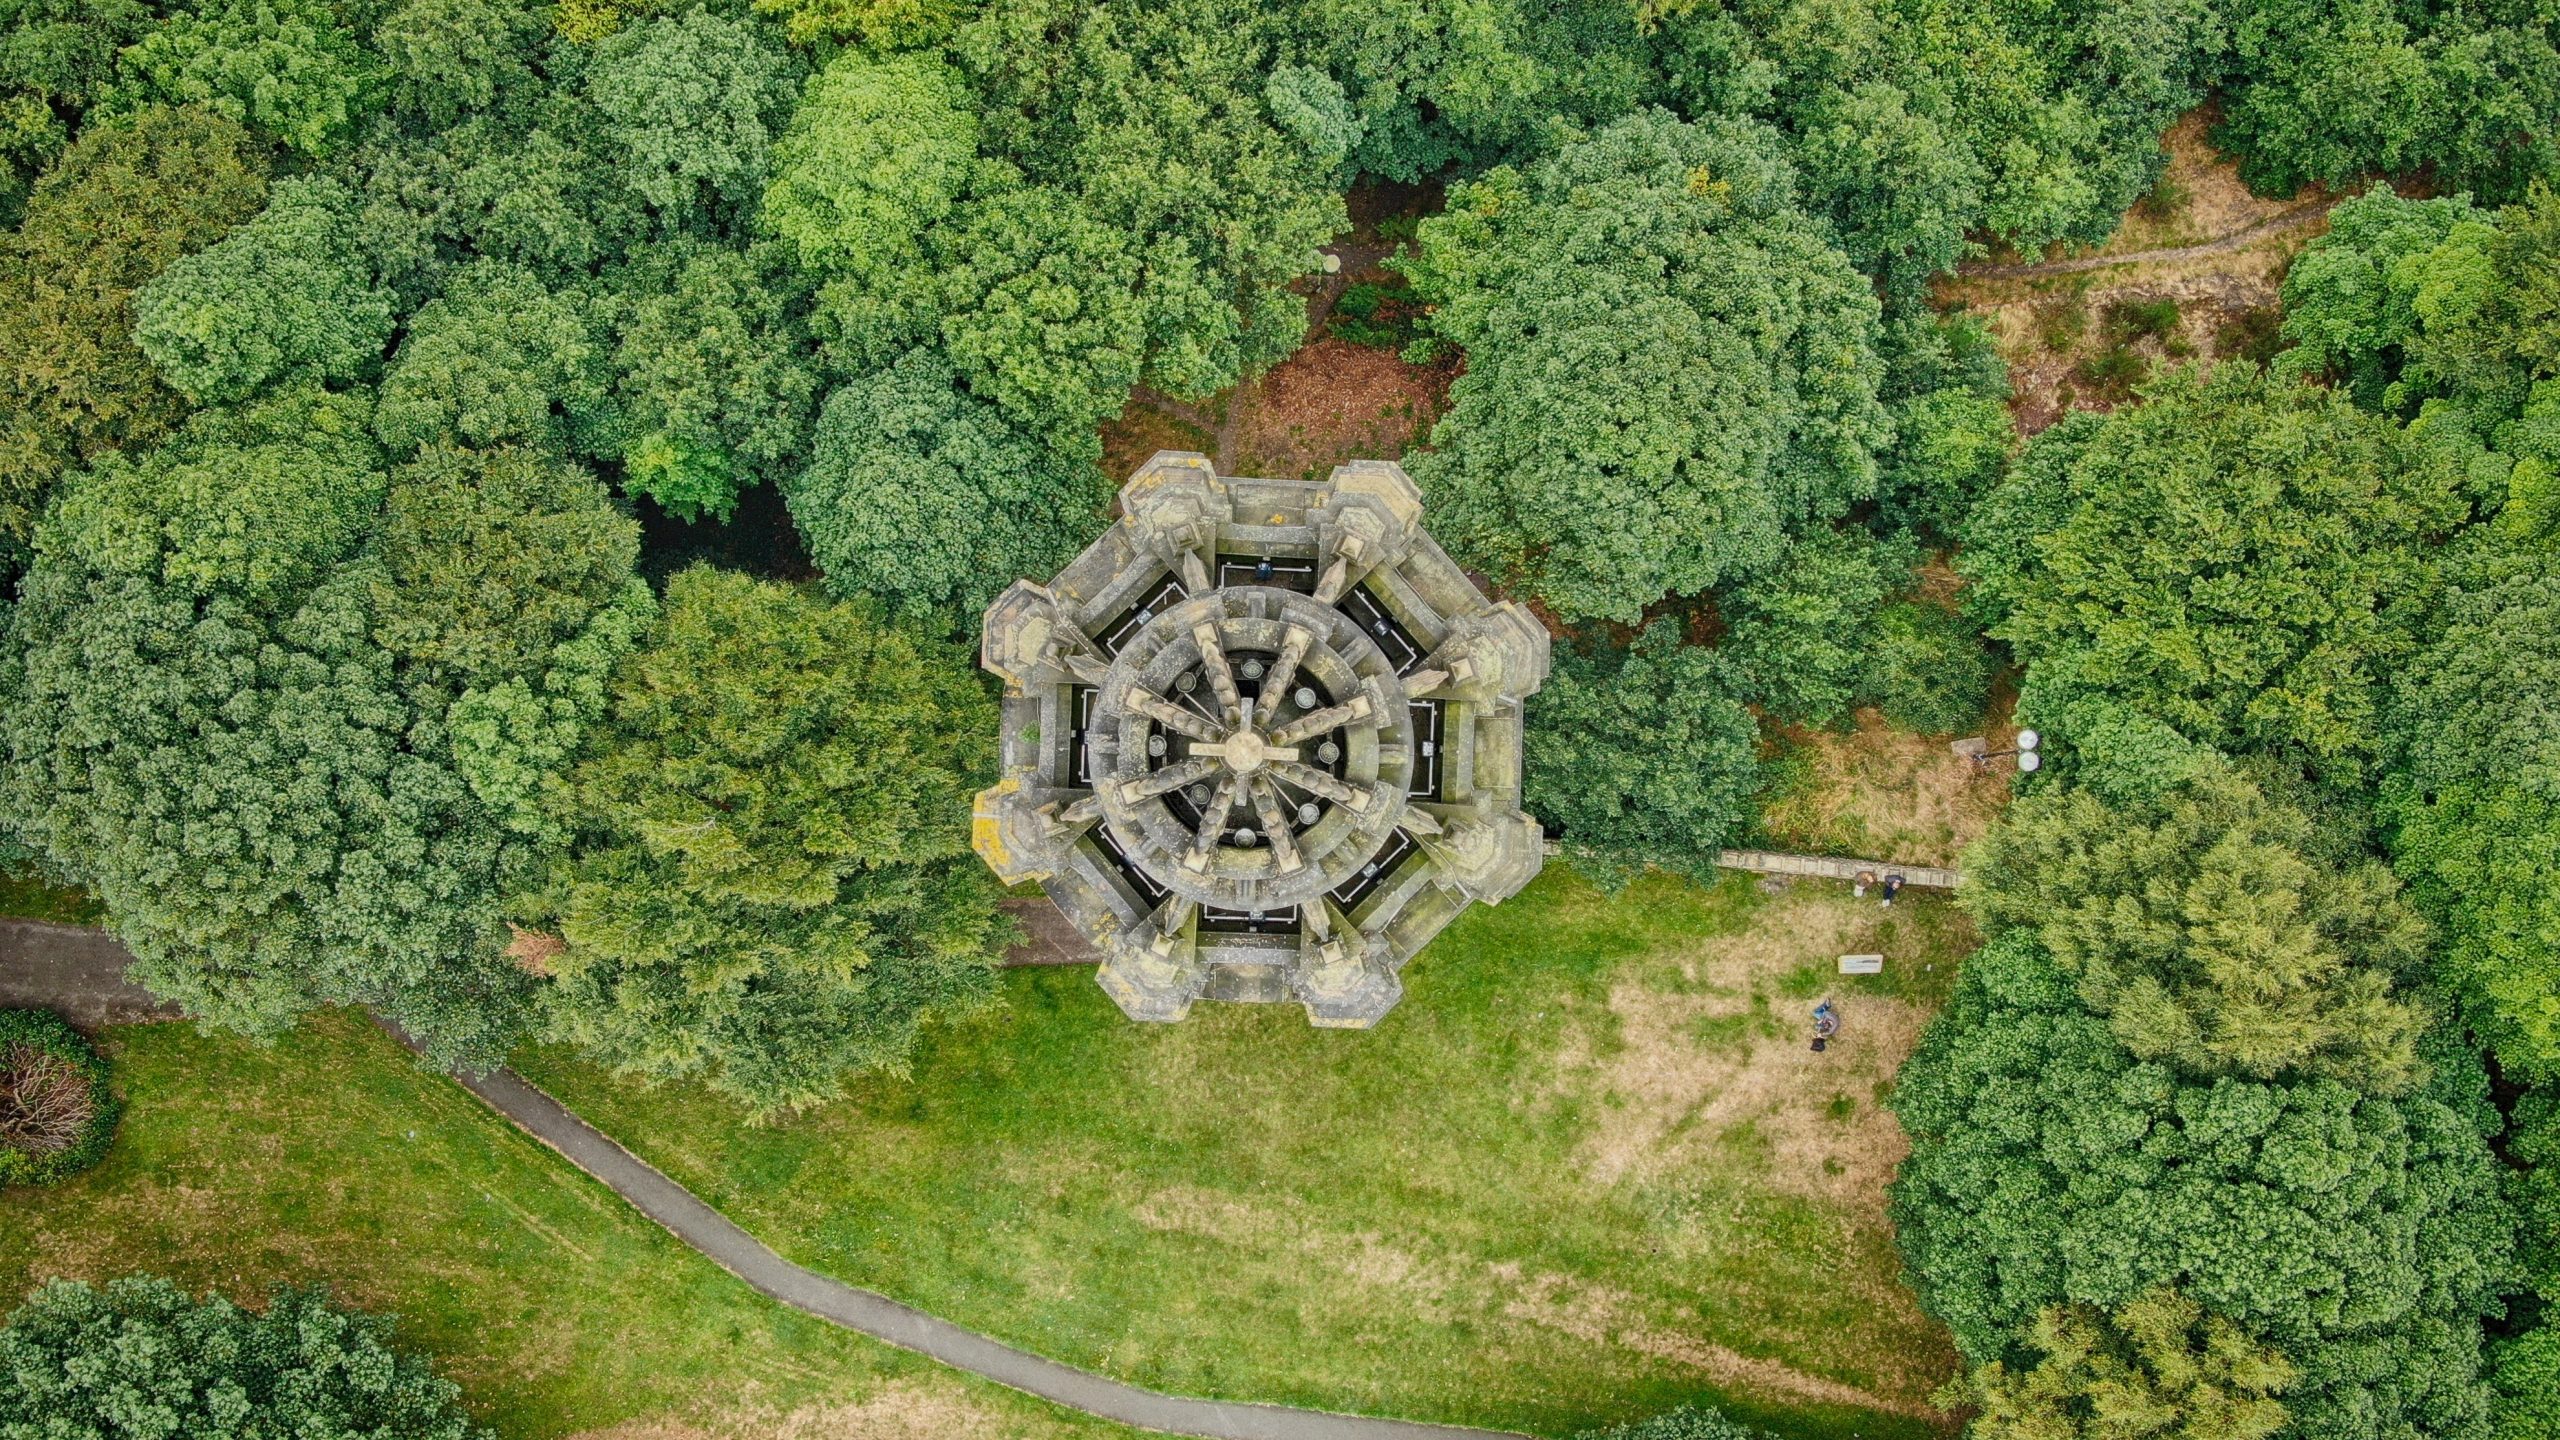 Wainhouse tower from directly above